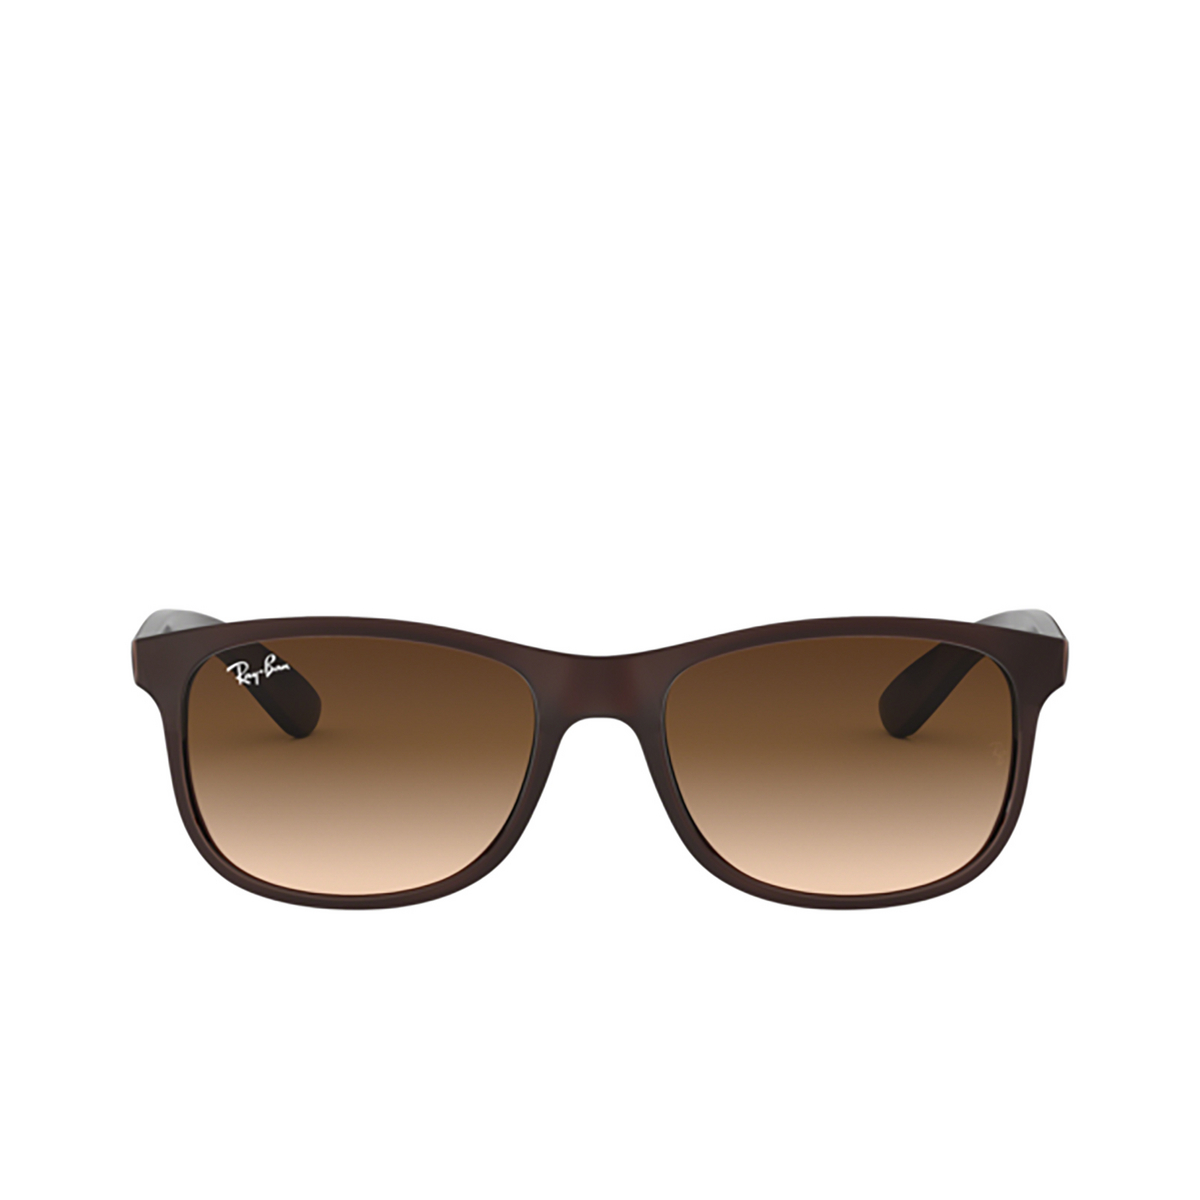 Ray-Ban ANDY Sunglasses 607313 MATTE BROWN ON BROWN - front view